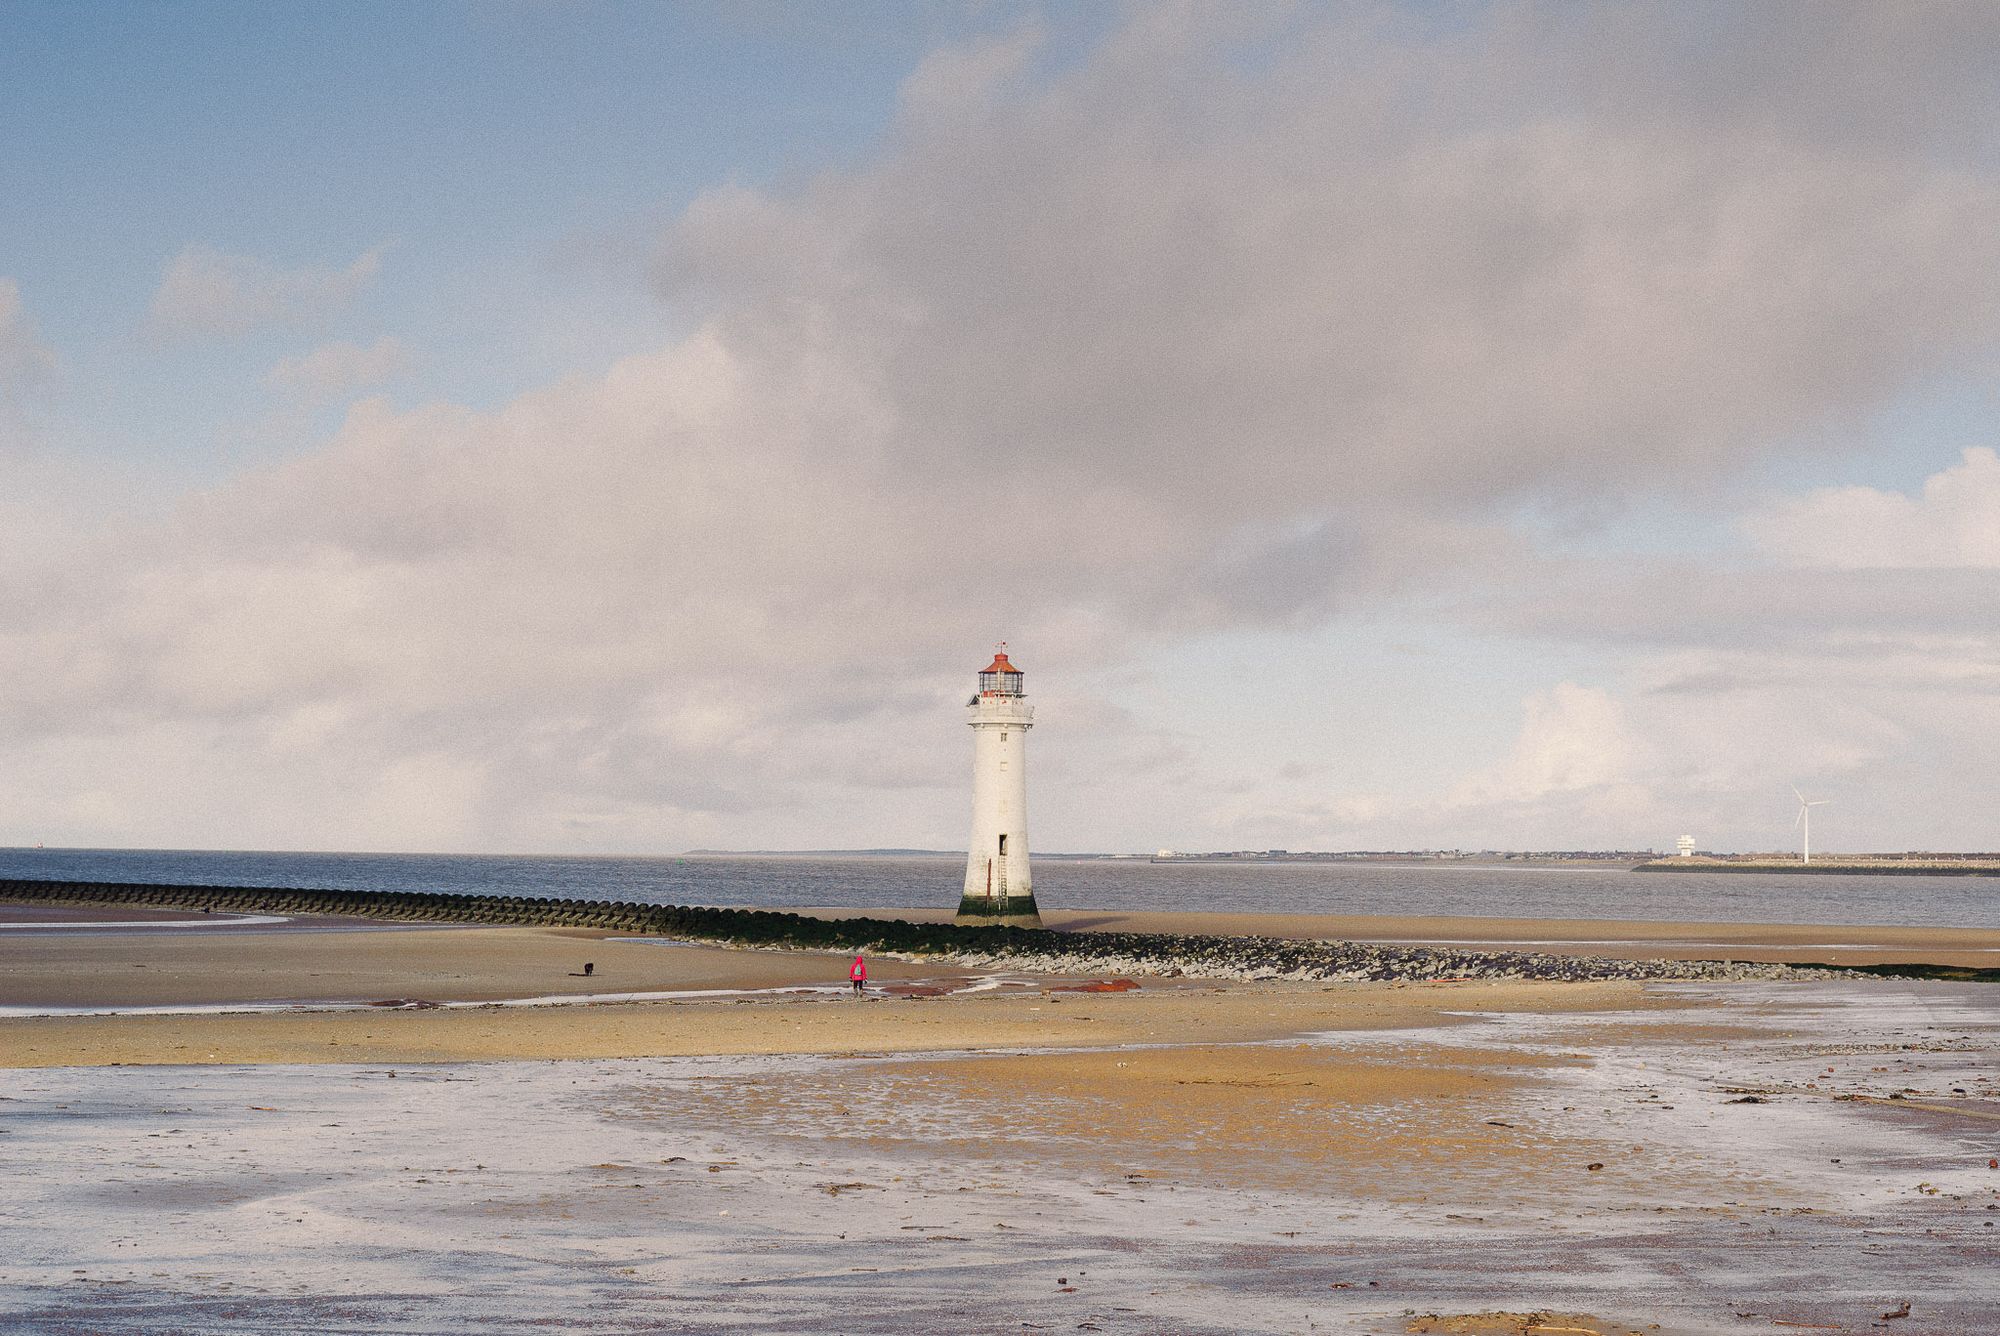 New Brighton lighthouse on a mostly clear day. The tide is out and people are walking on the beach.